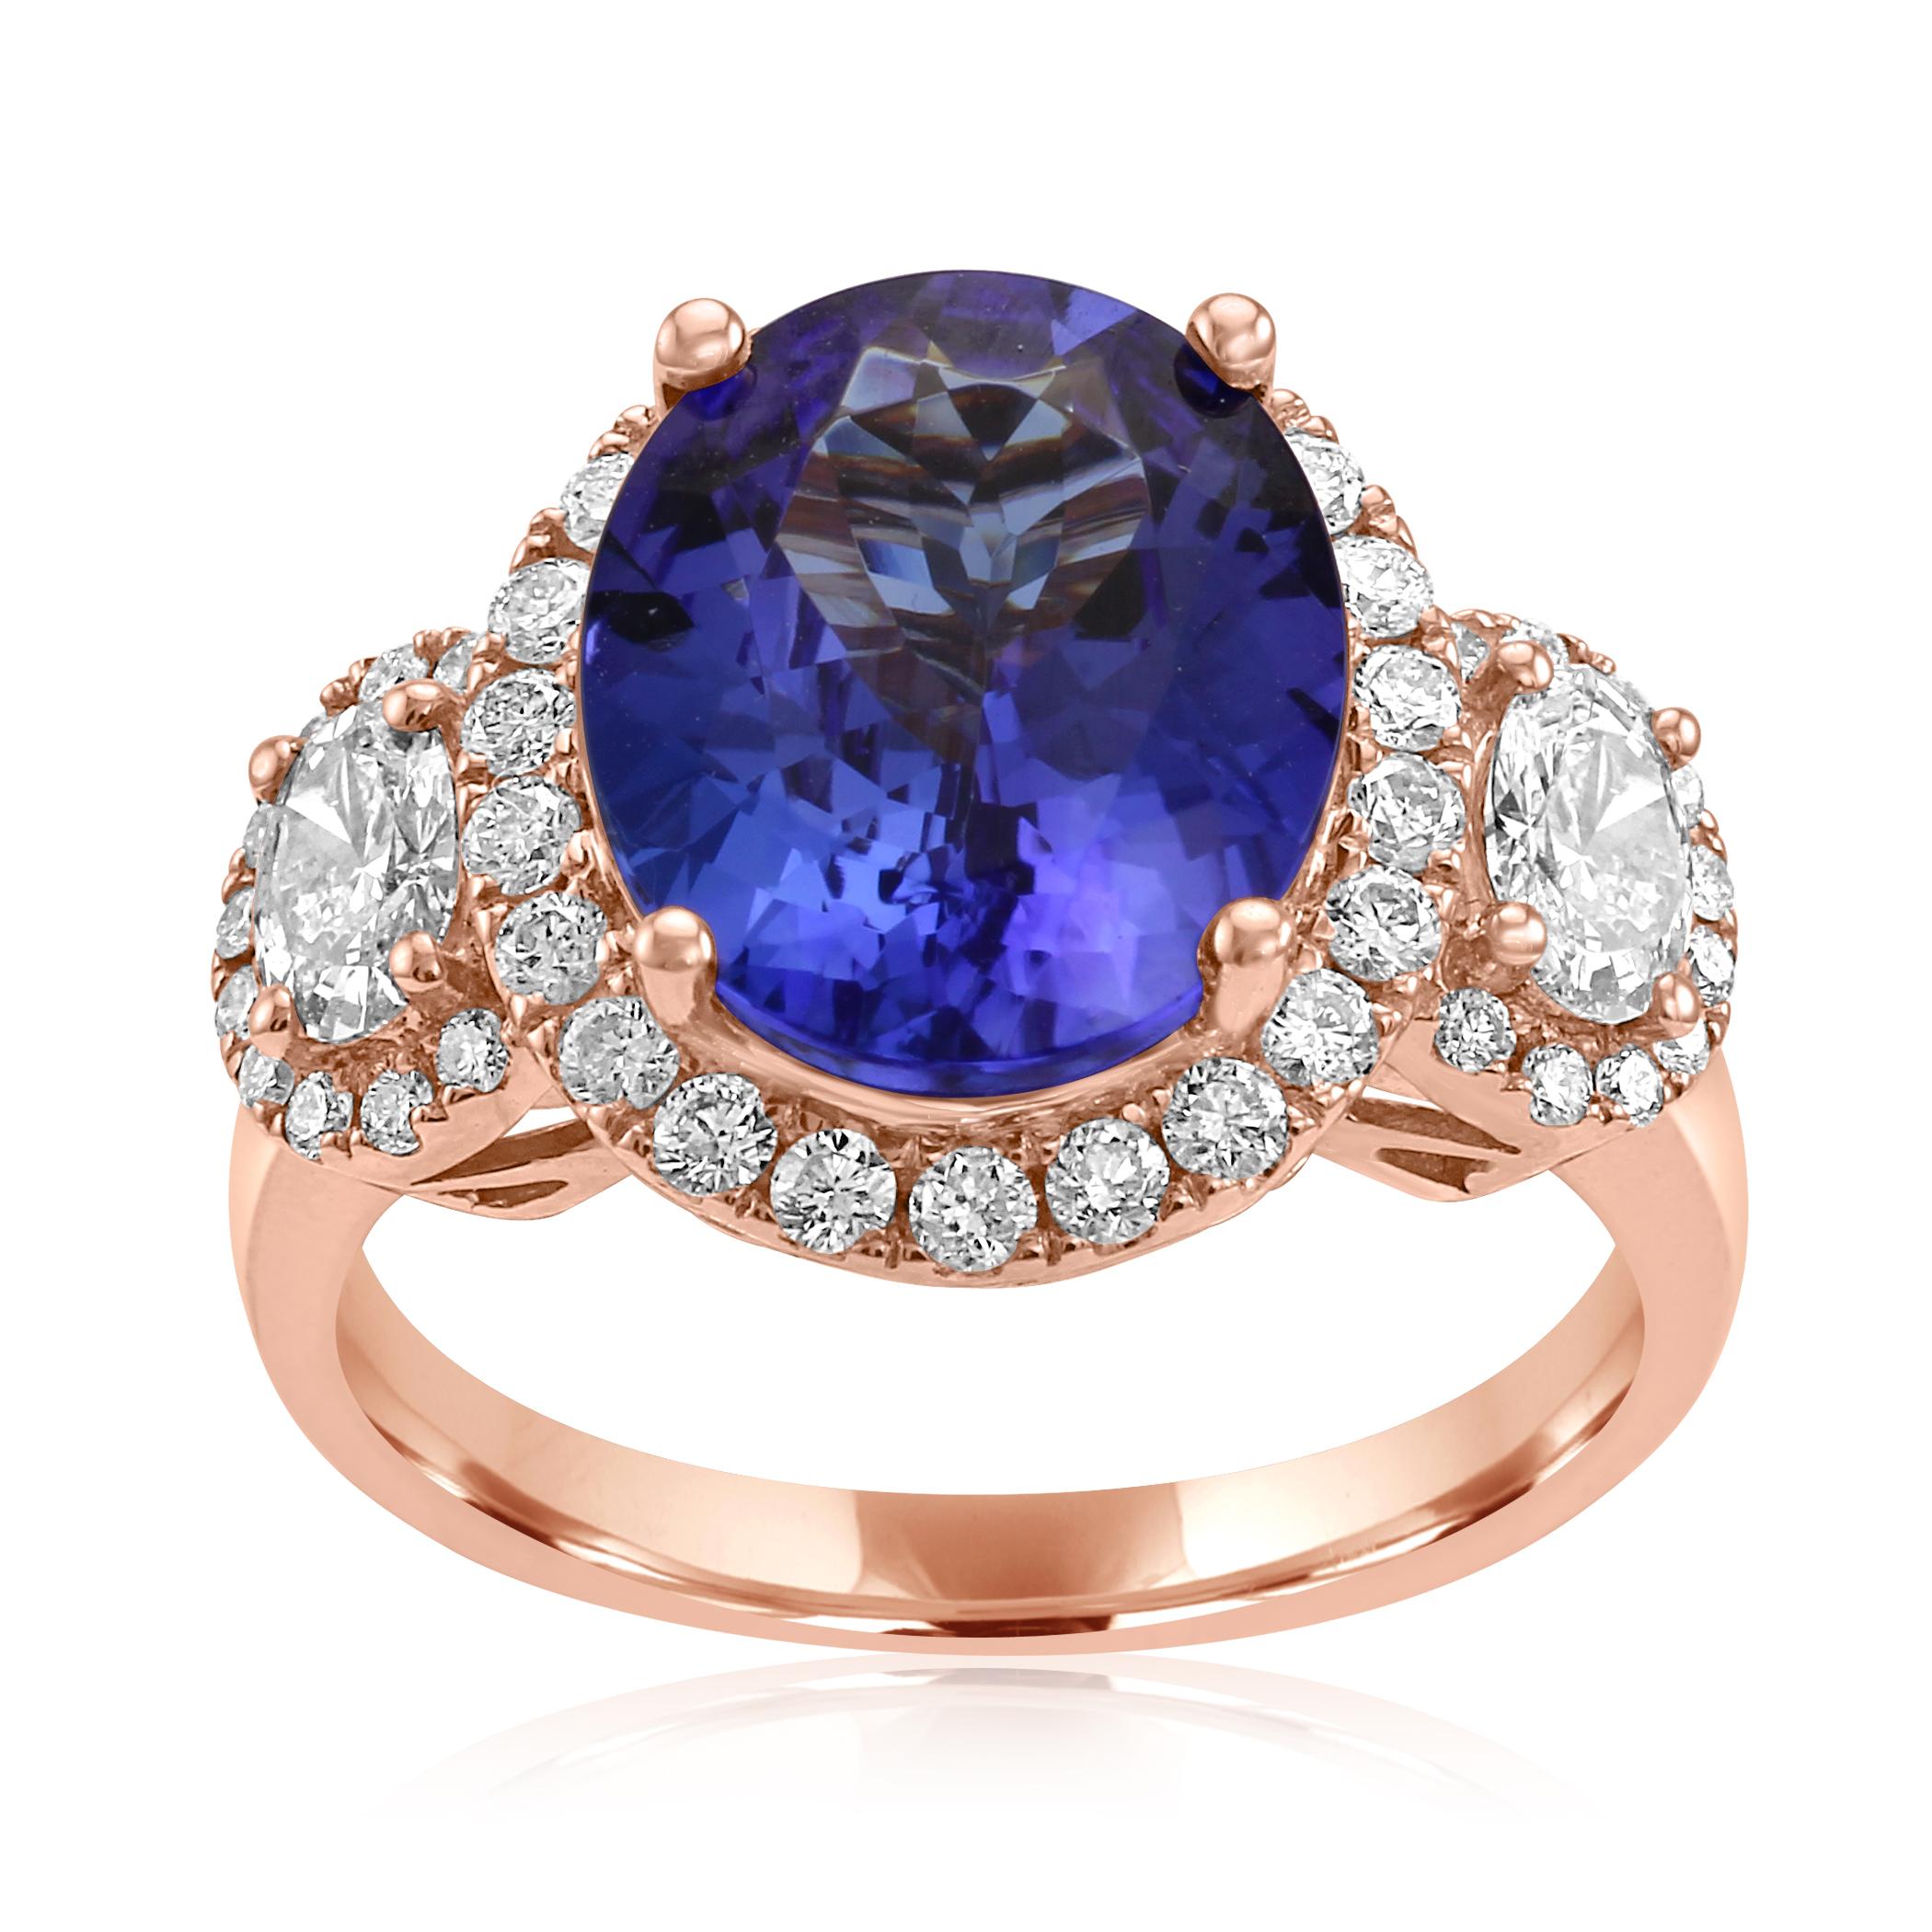 Stunning Tanzanite Oval 4.81 Carat Flanked by 2 White G-H color VS-SI Clarity Diamond Ovals 0.80 Carat encircled in single Halo of White G--H Color SI clarity Diamond Rounds 0.60 Carat set in Gorgeous 18K Rose Gold Three Stone Fashion Cocktail